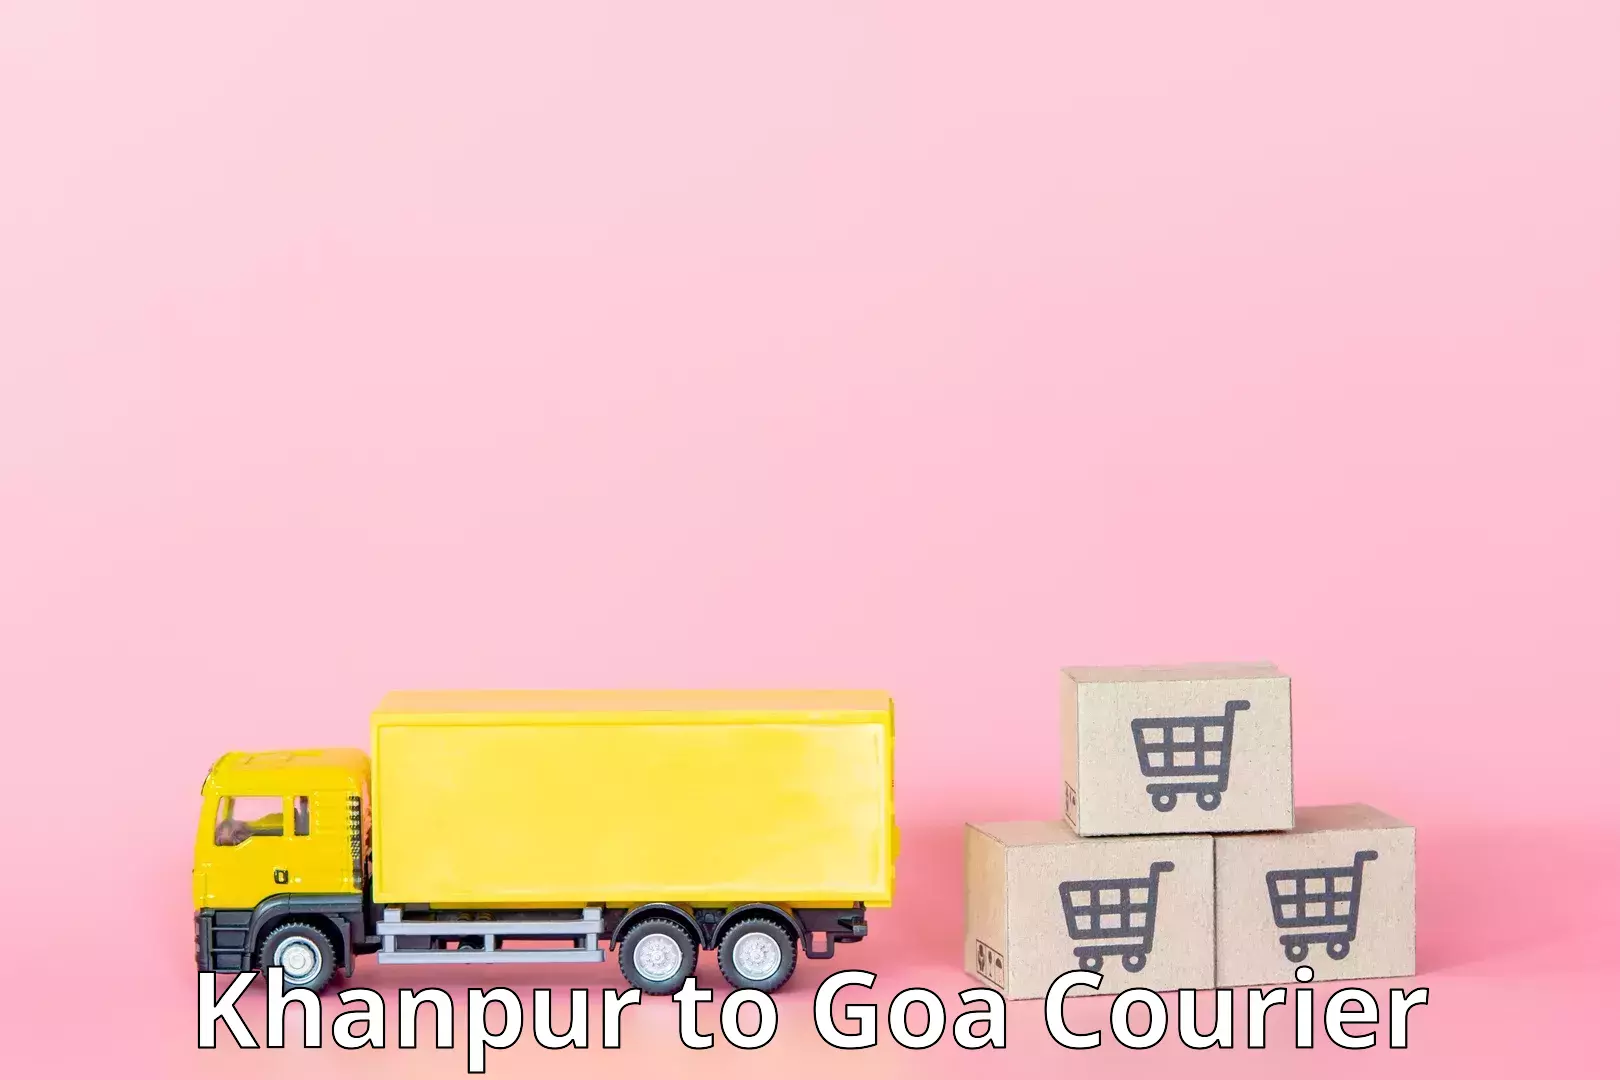 State-of-the-art courier technology Khanpur to Goa